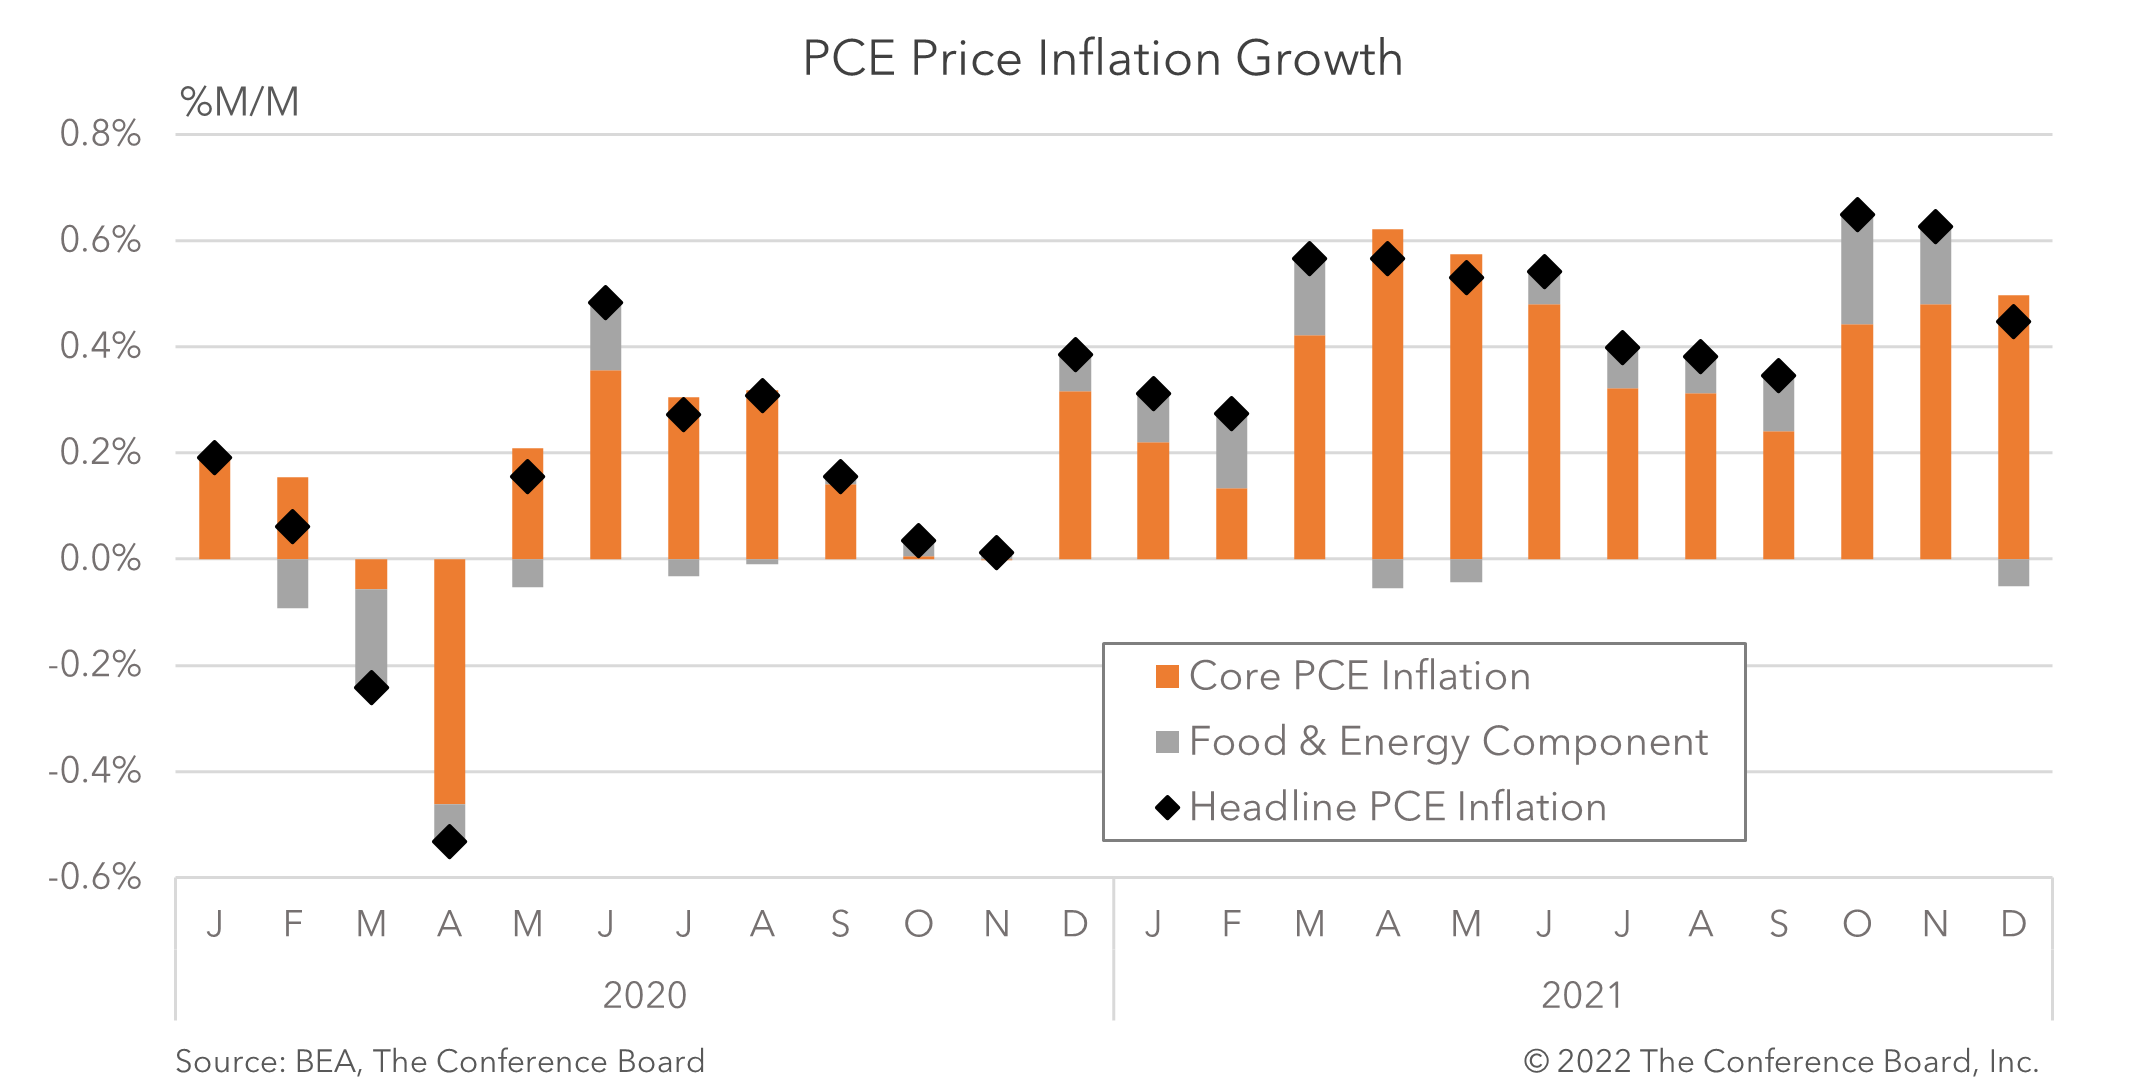 When Will Inflation Start to Improve?